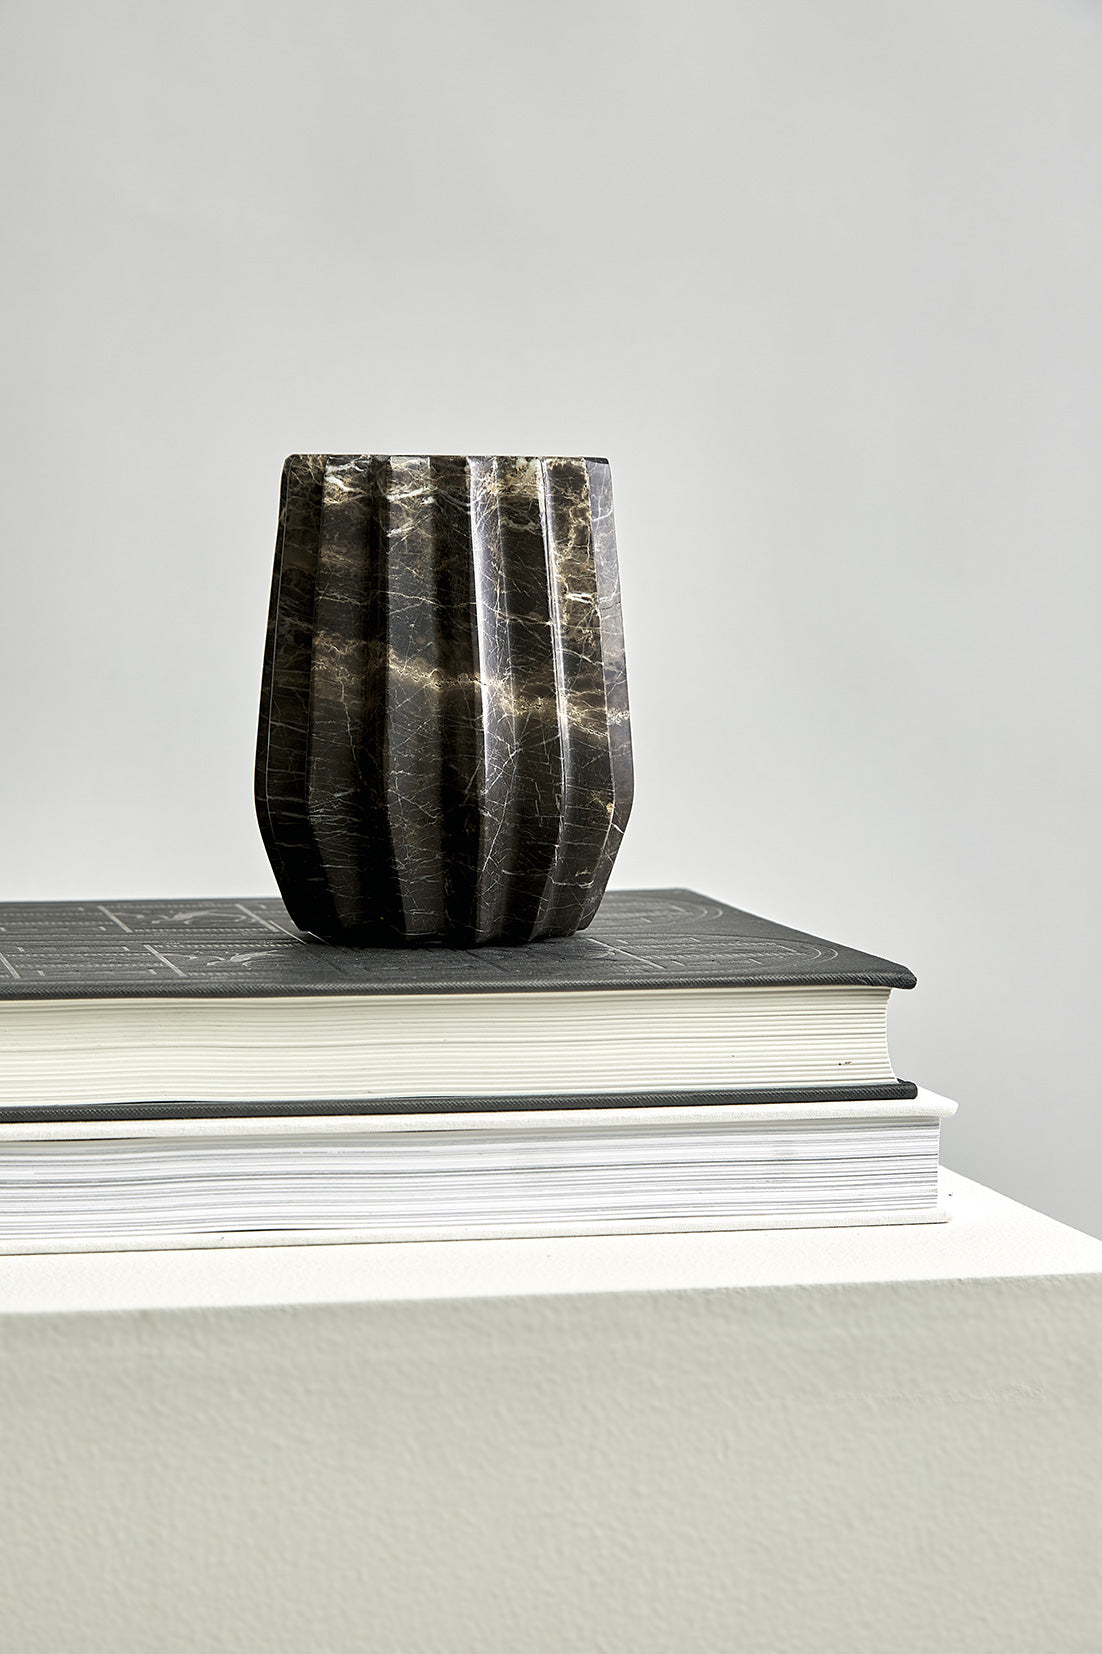 Duna sculptural vase from Monterrey black marble with white veining hand-carved in Mexico